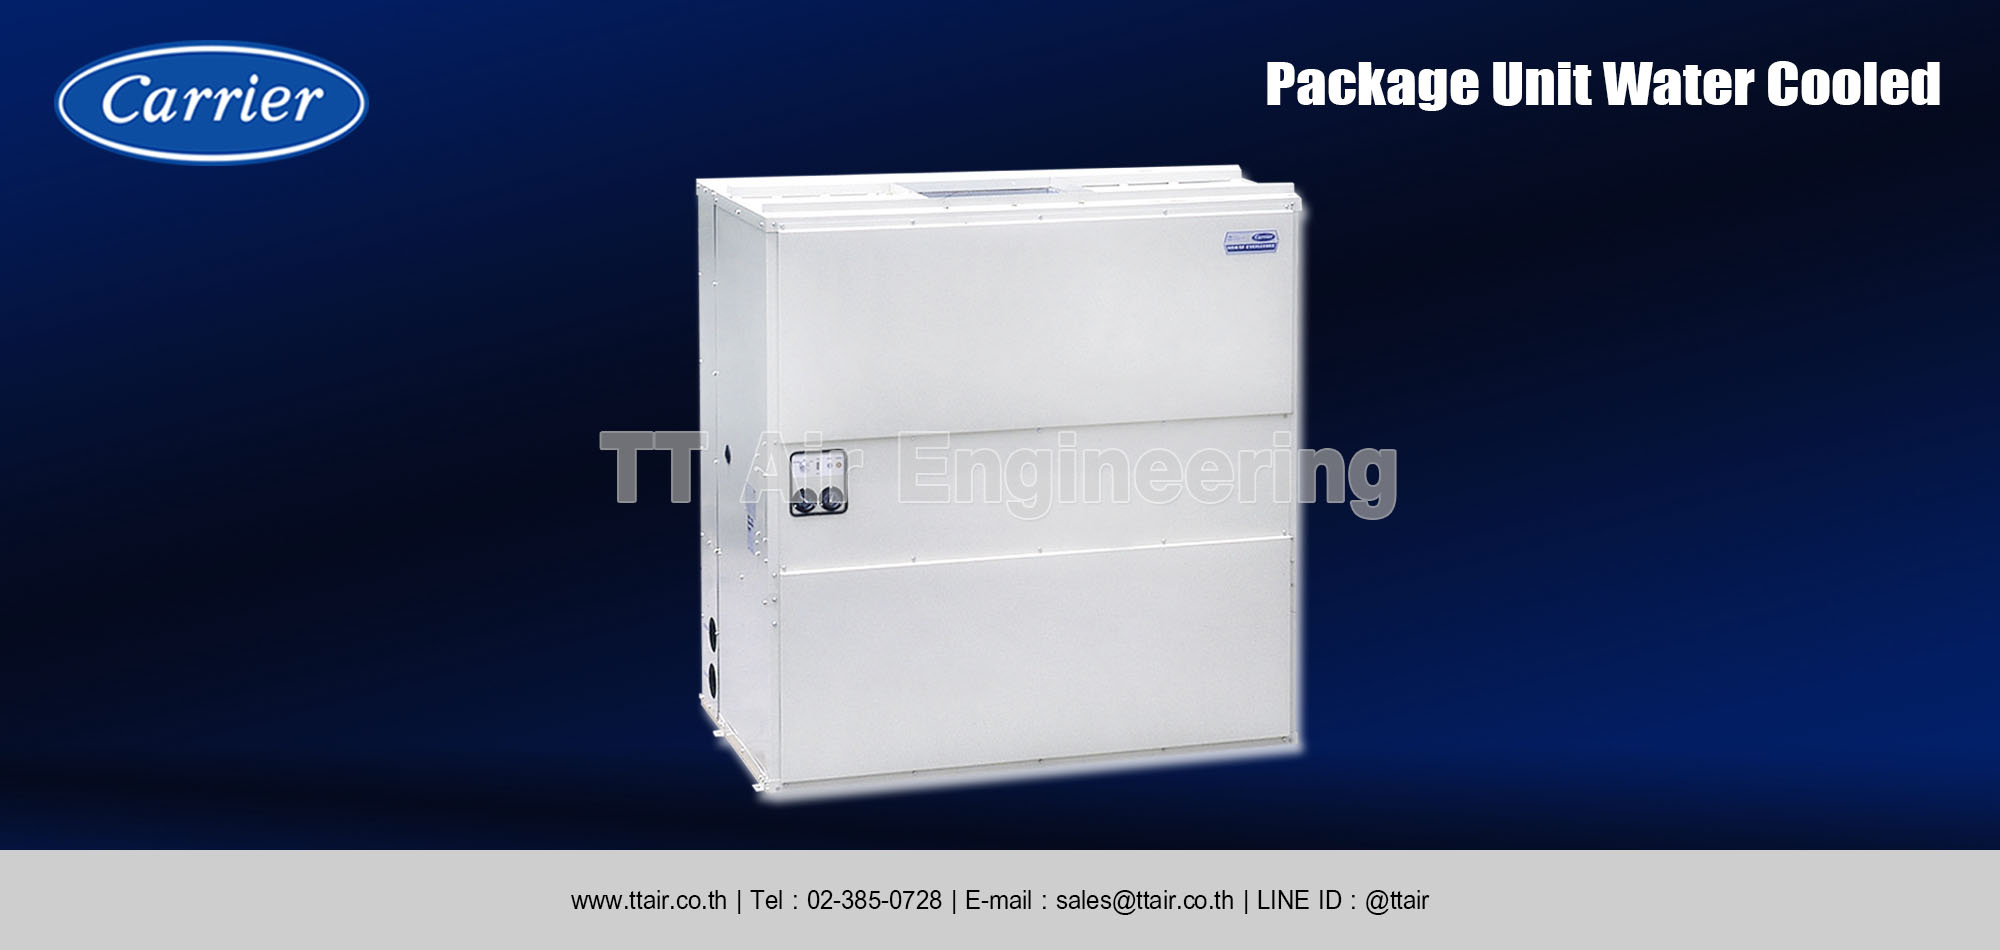 Carrier Package Unit Water Cooled category